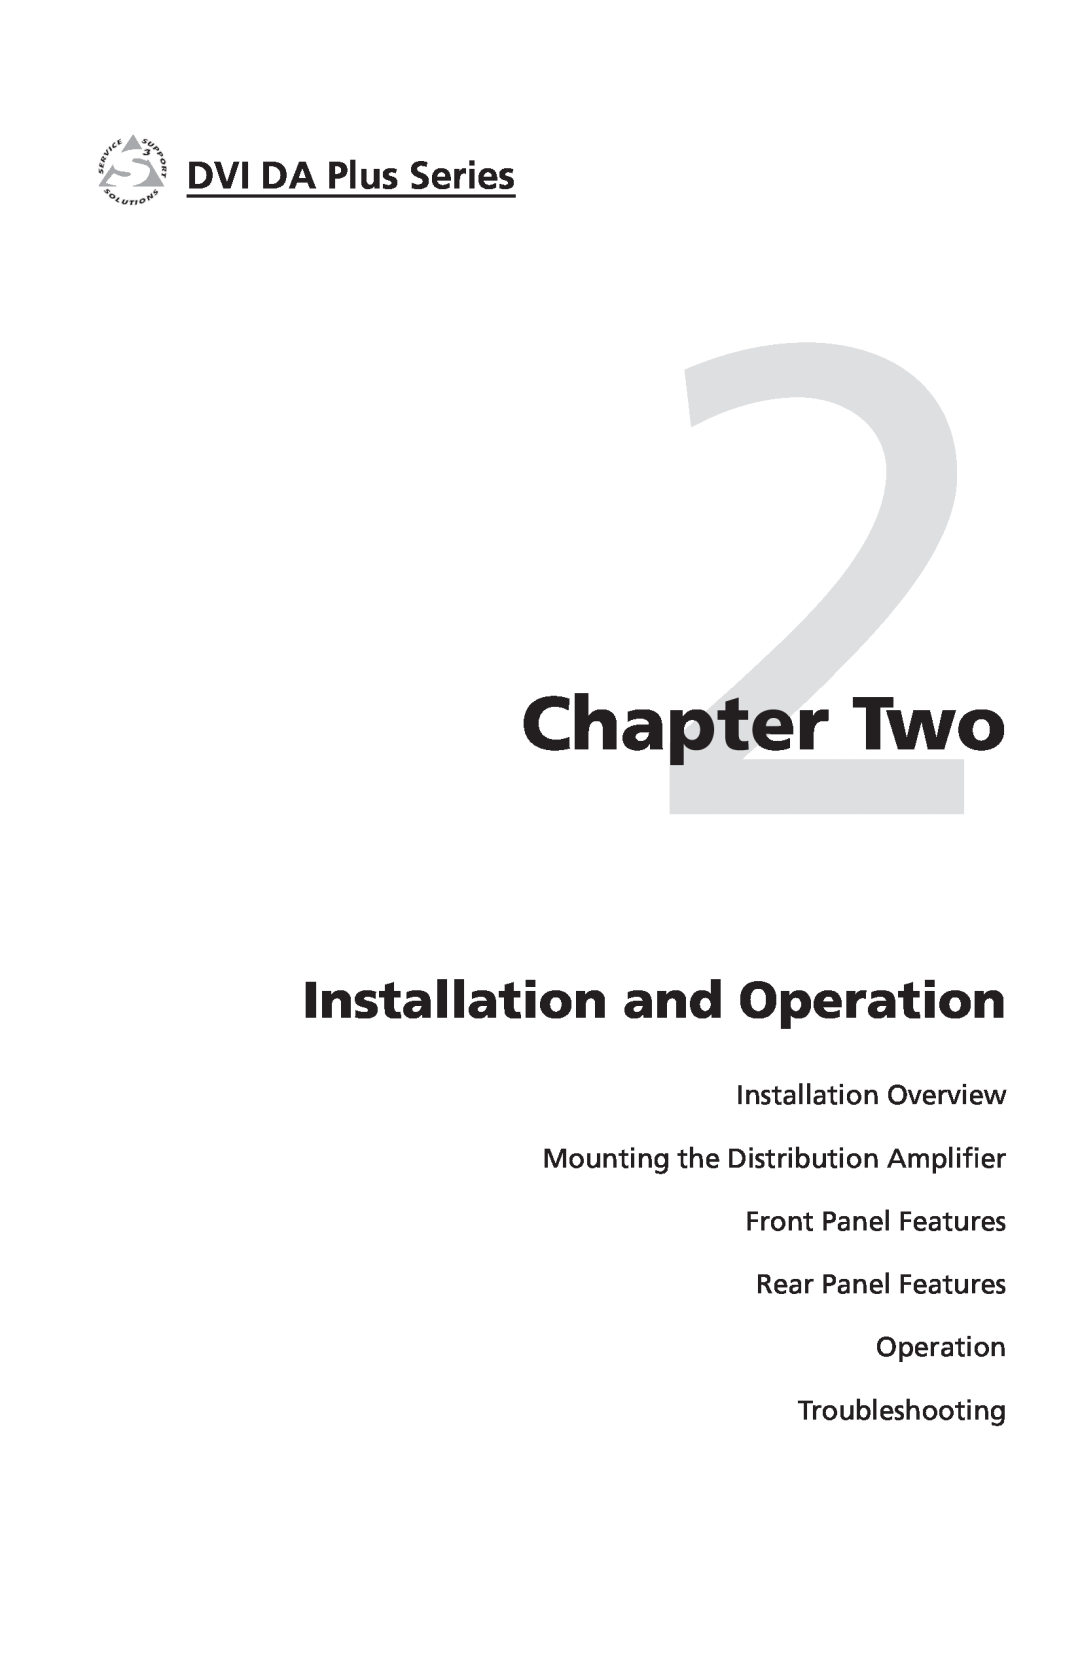 Extron electronic DVI DA8 Plus Two, Installation and Operation, Installation Overview, Mounting the Distribution Amplifier 